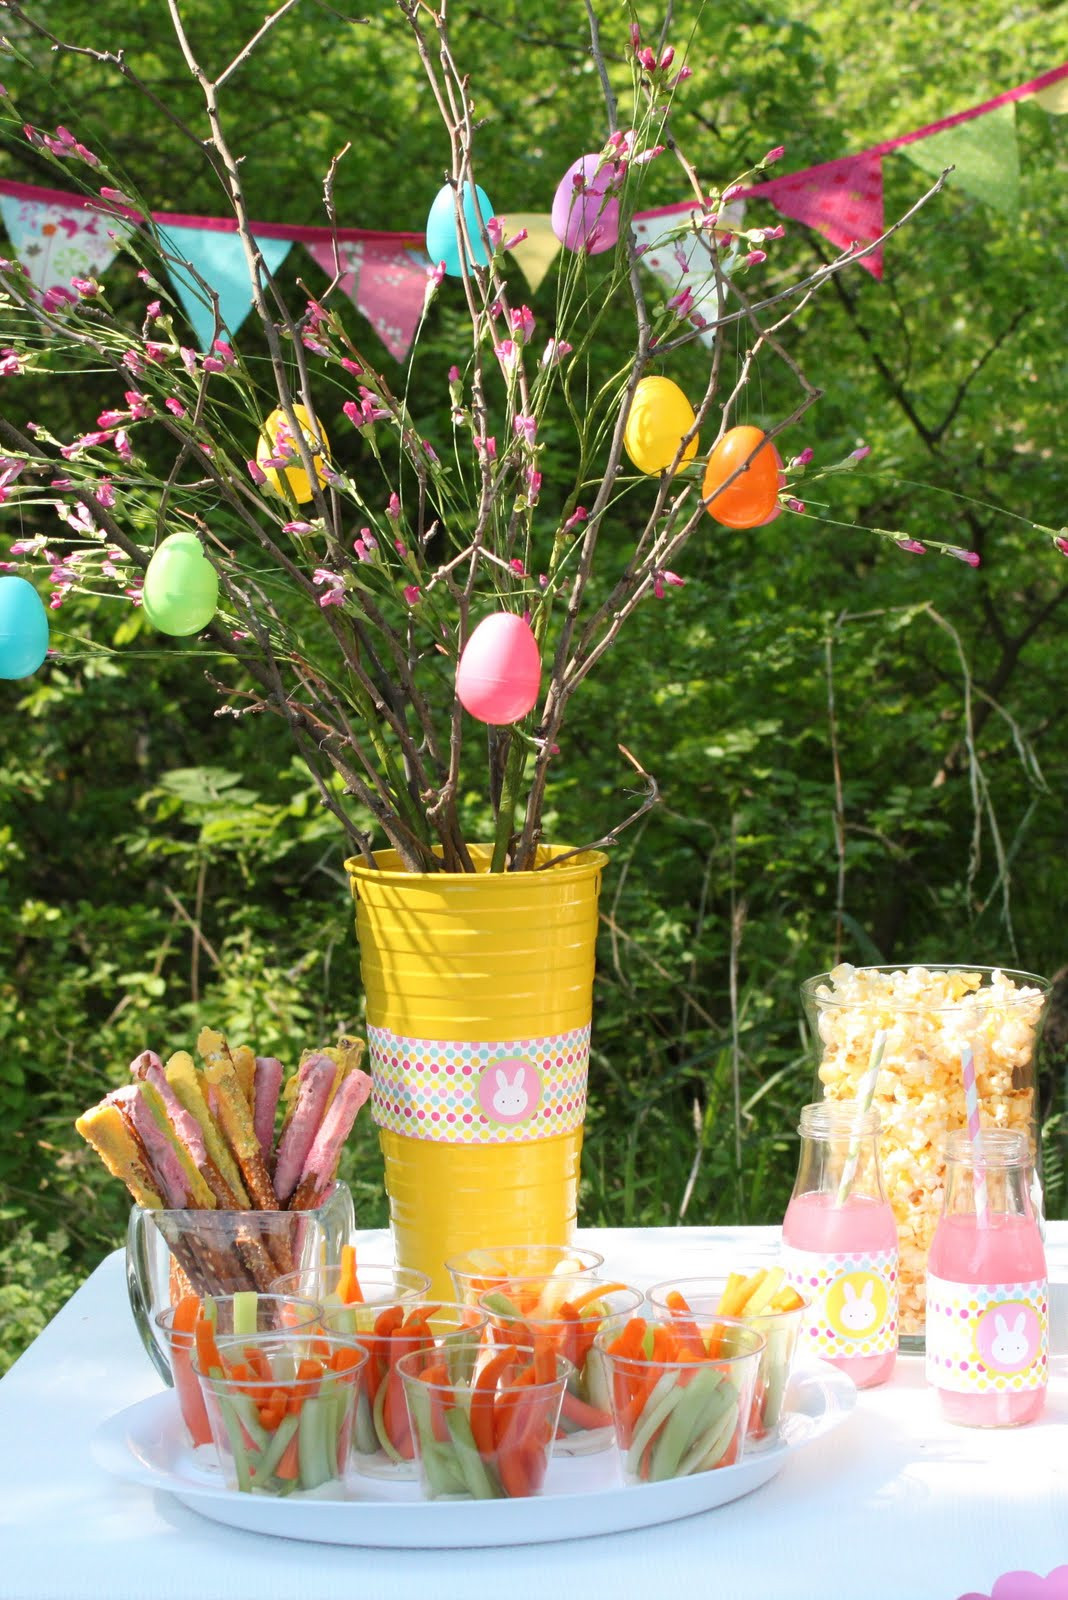 Easter Egg Hunt Birthday Party Ideas
 Easter Egg Hunt Party